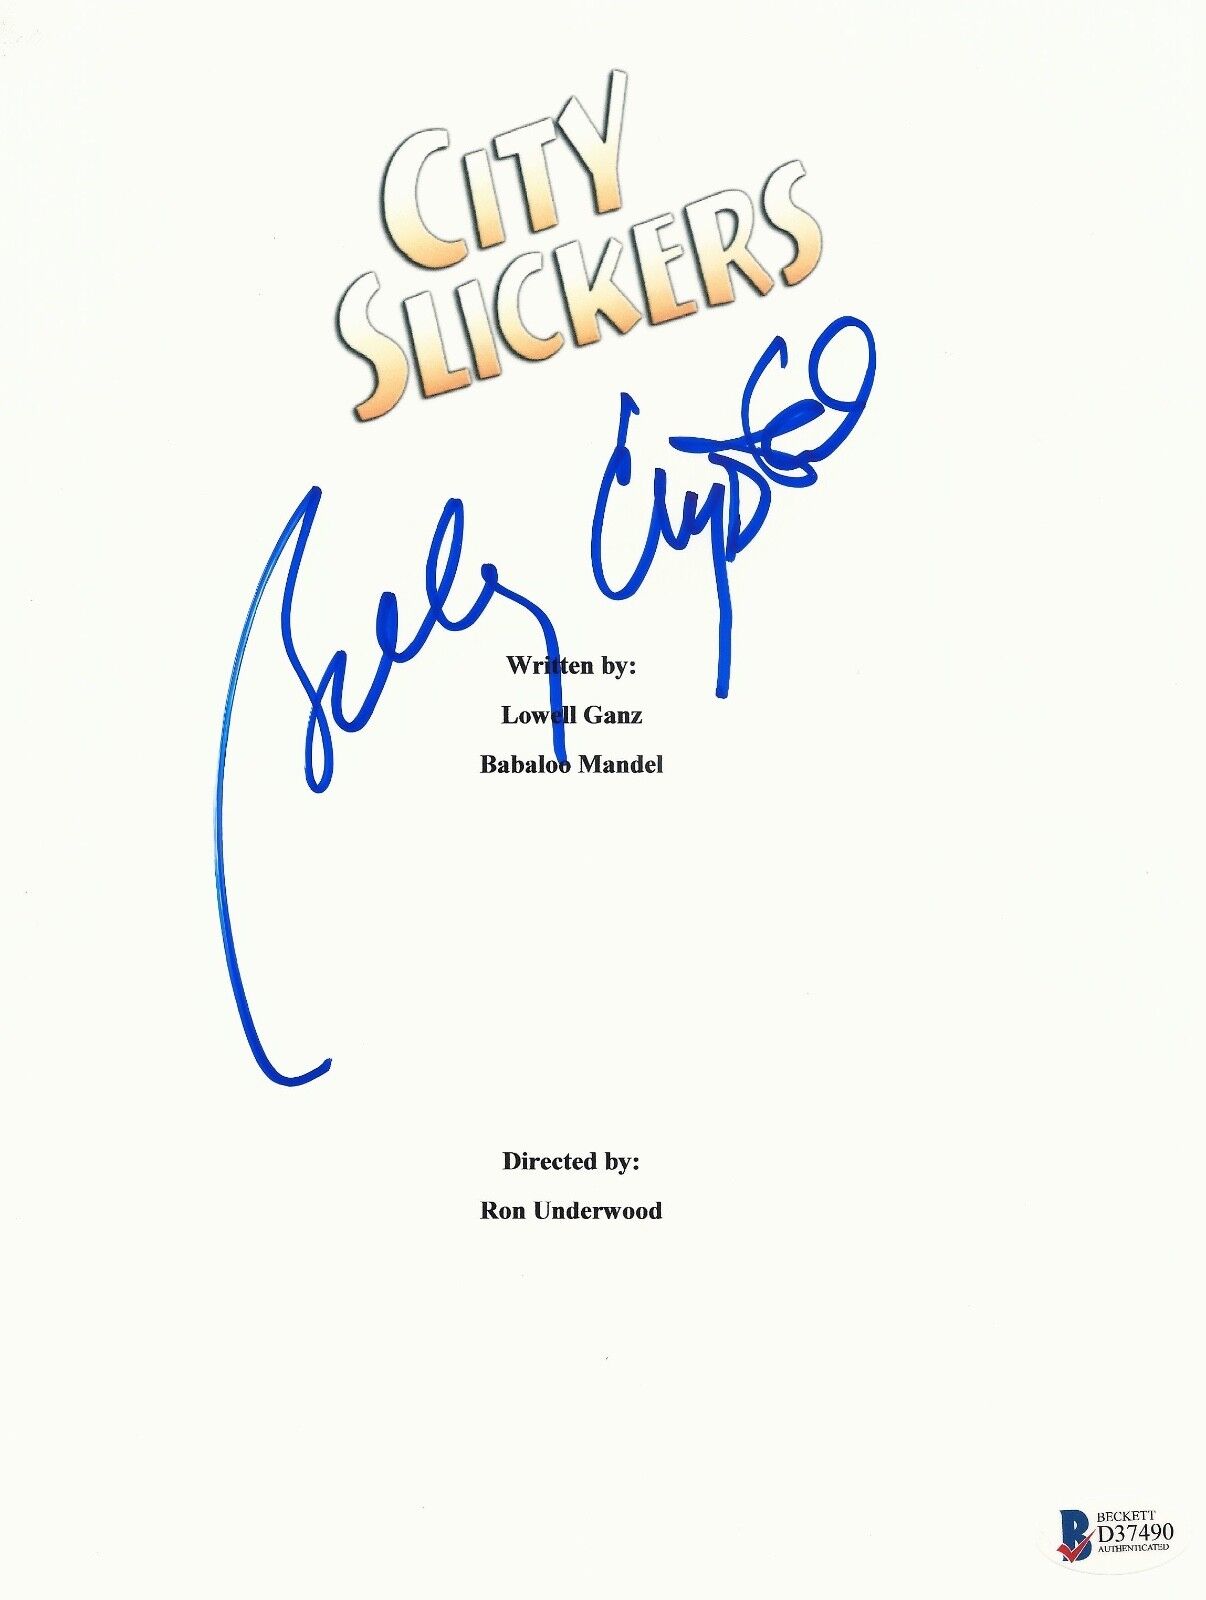 BILLY CRYSTAL SIGNED CITY SLICKERS FULL SCRIPT SCREENPLAY AUTHENTIC AUTO BECKETT